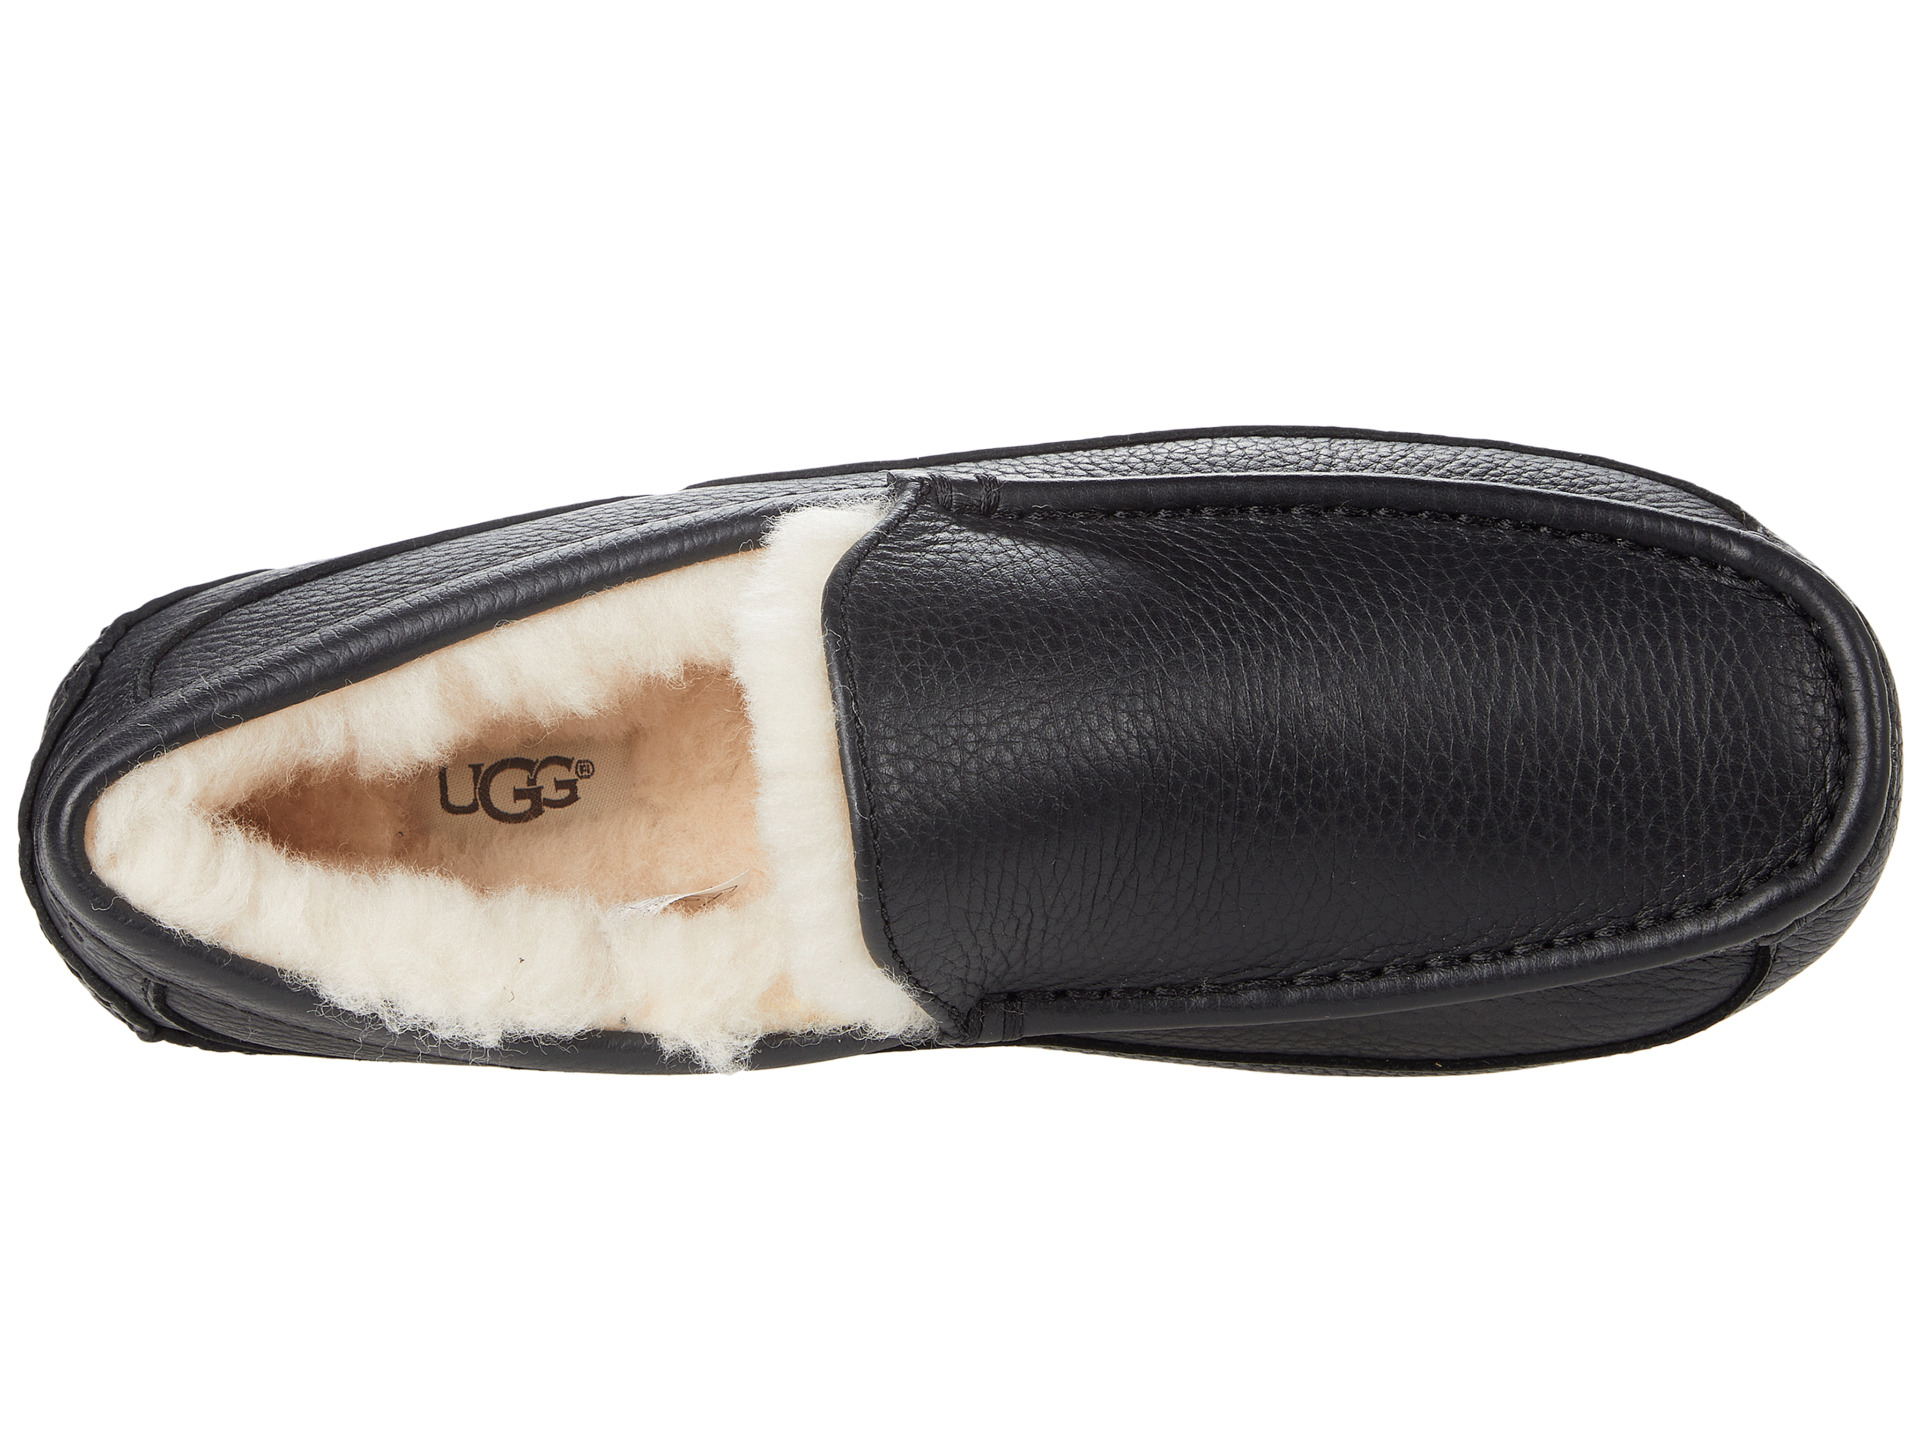 Ugg for slippers For leather ascot  zappos.com Slippers men Men  Ugg zappos